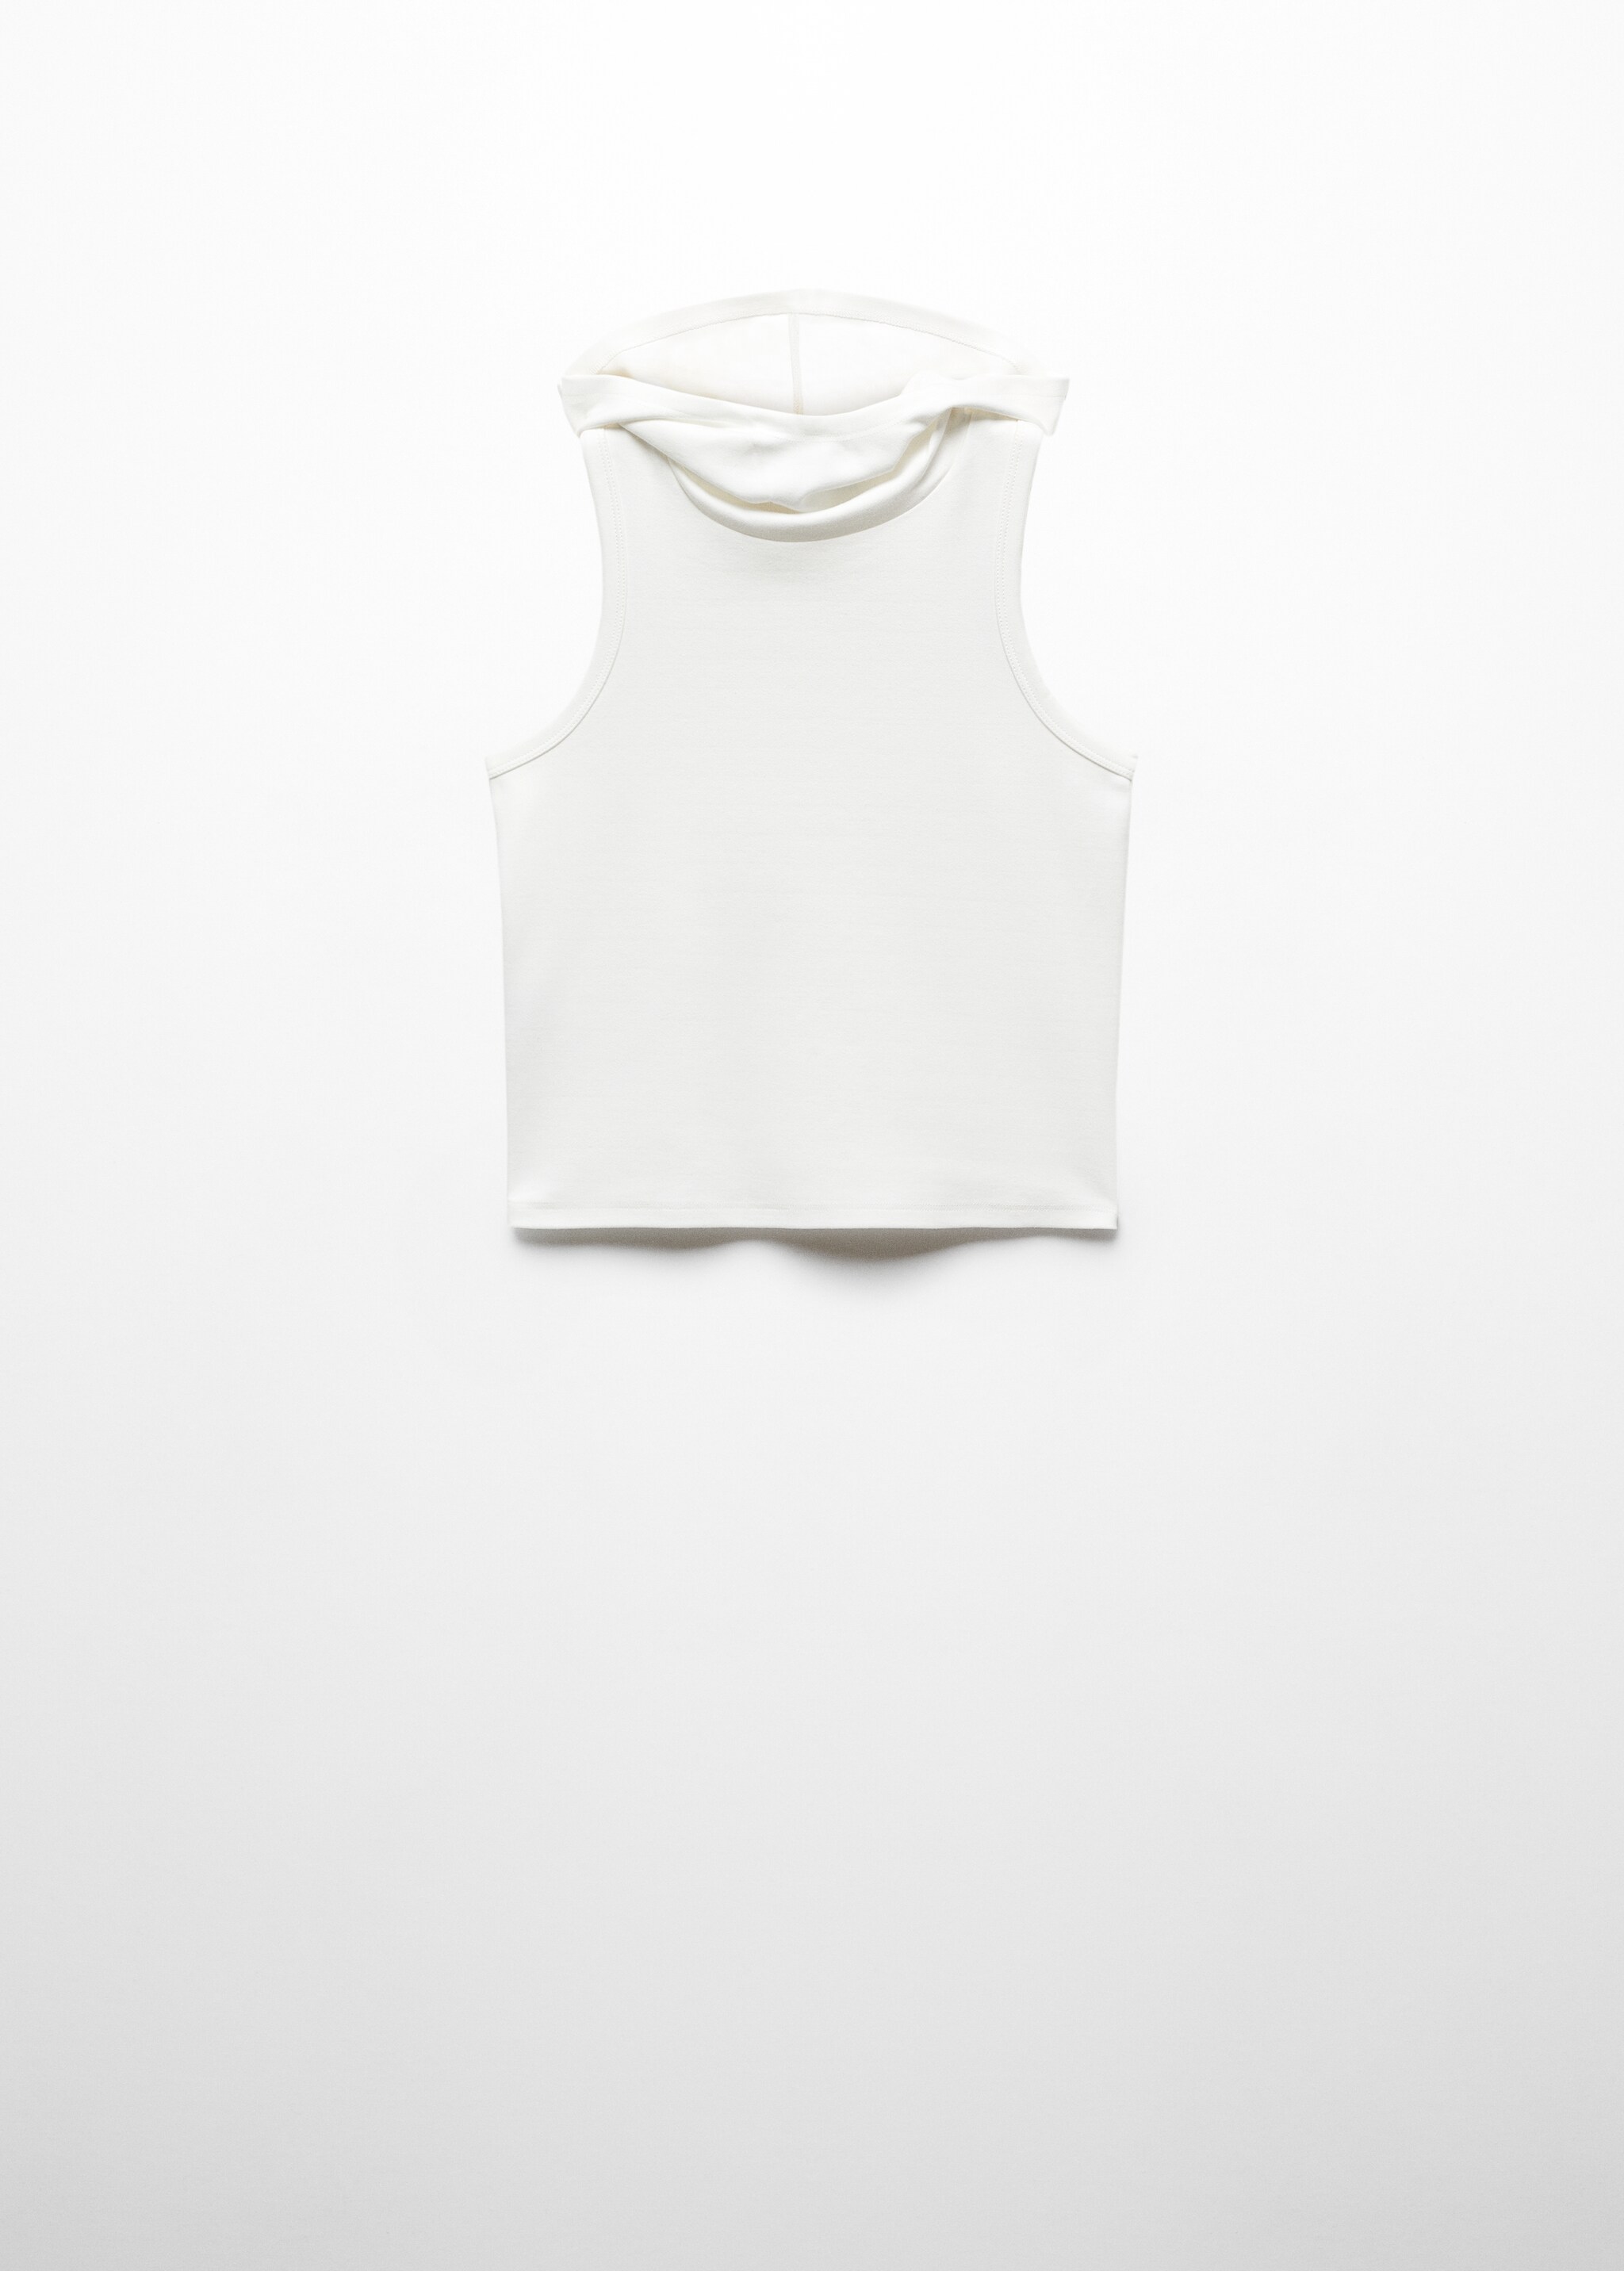 Sleeveless hooded top - Article without model